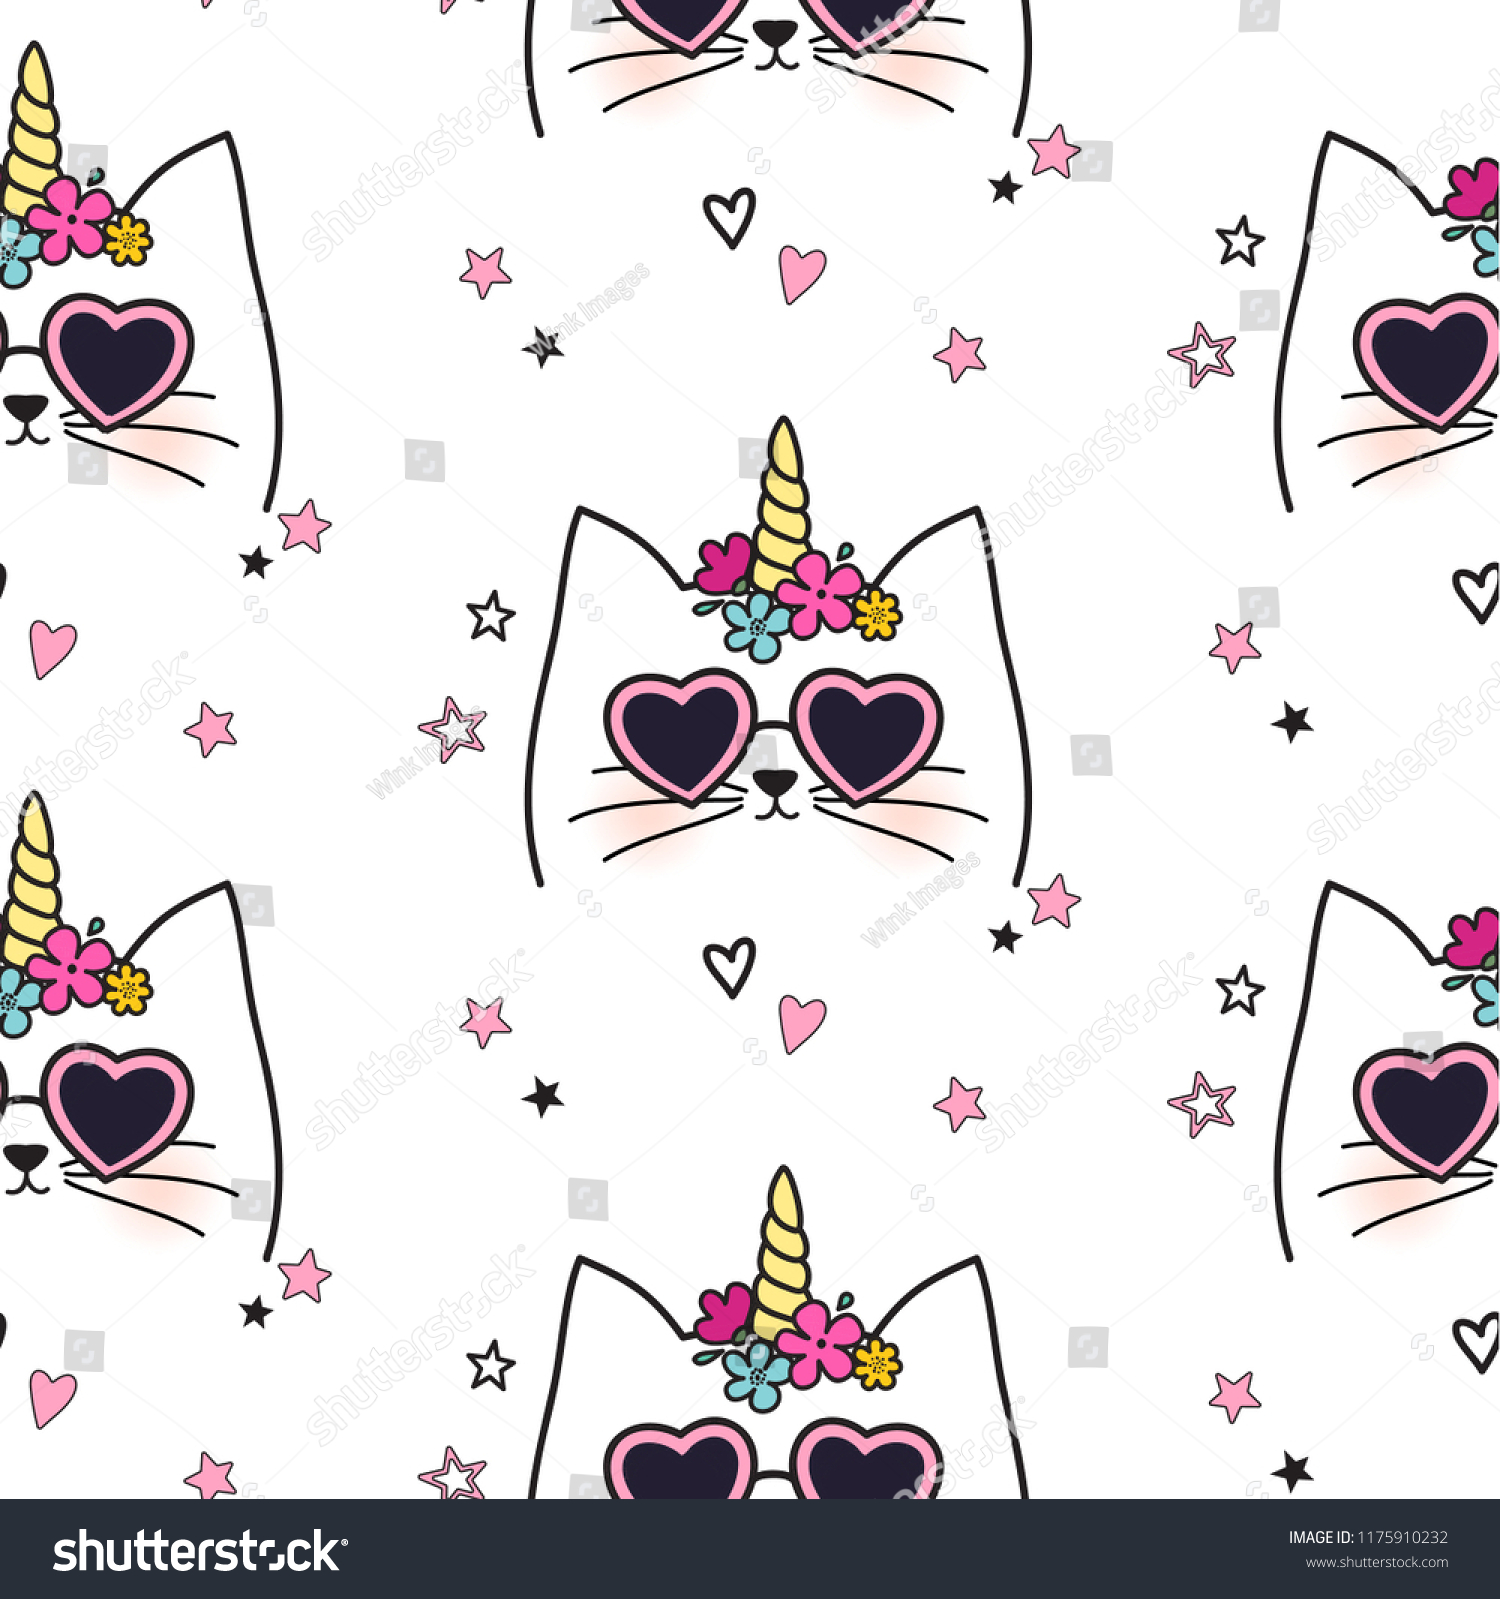 SVG of Seamless cat pattern. Hand drown caticorn cartoon character.  Cute kitty illustration for nursery design, birthday, baby shower design and party decor, print svg